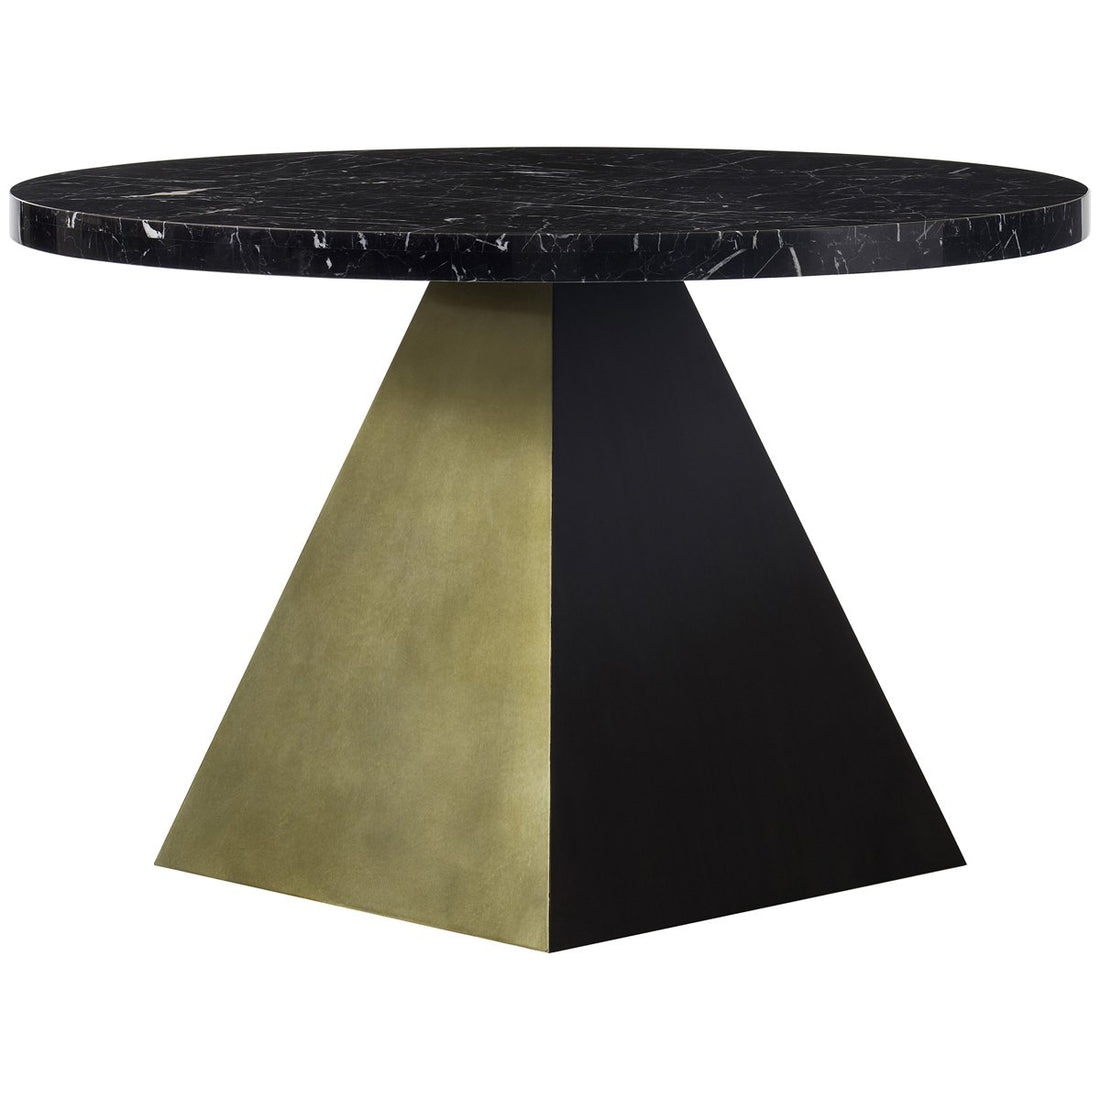 Reagan Hayes Louis Dining Table - Marble Top